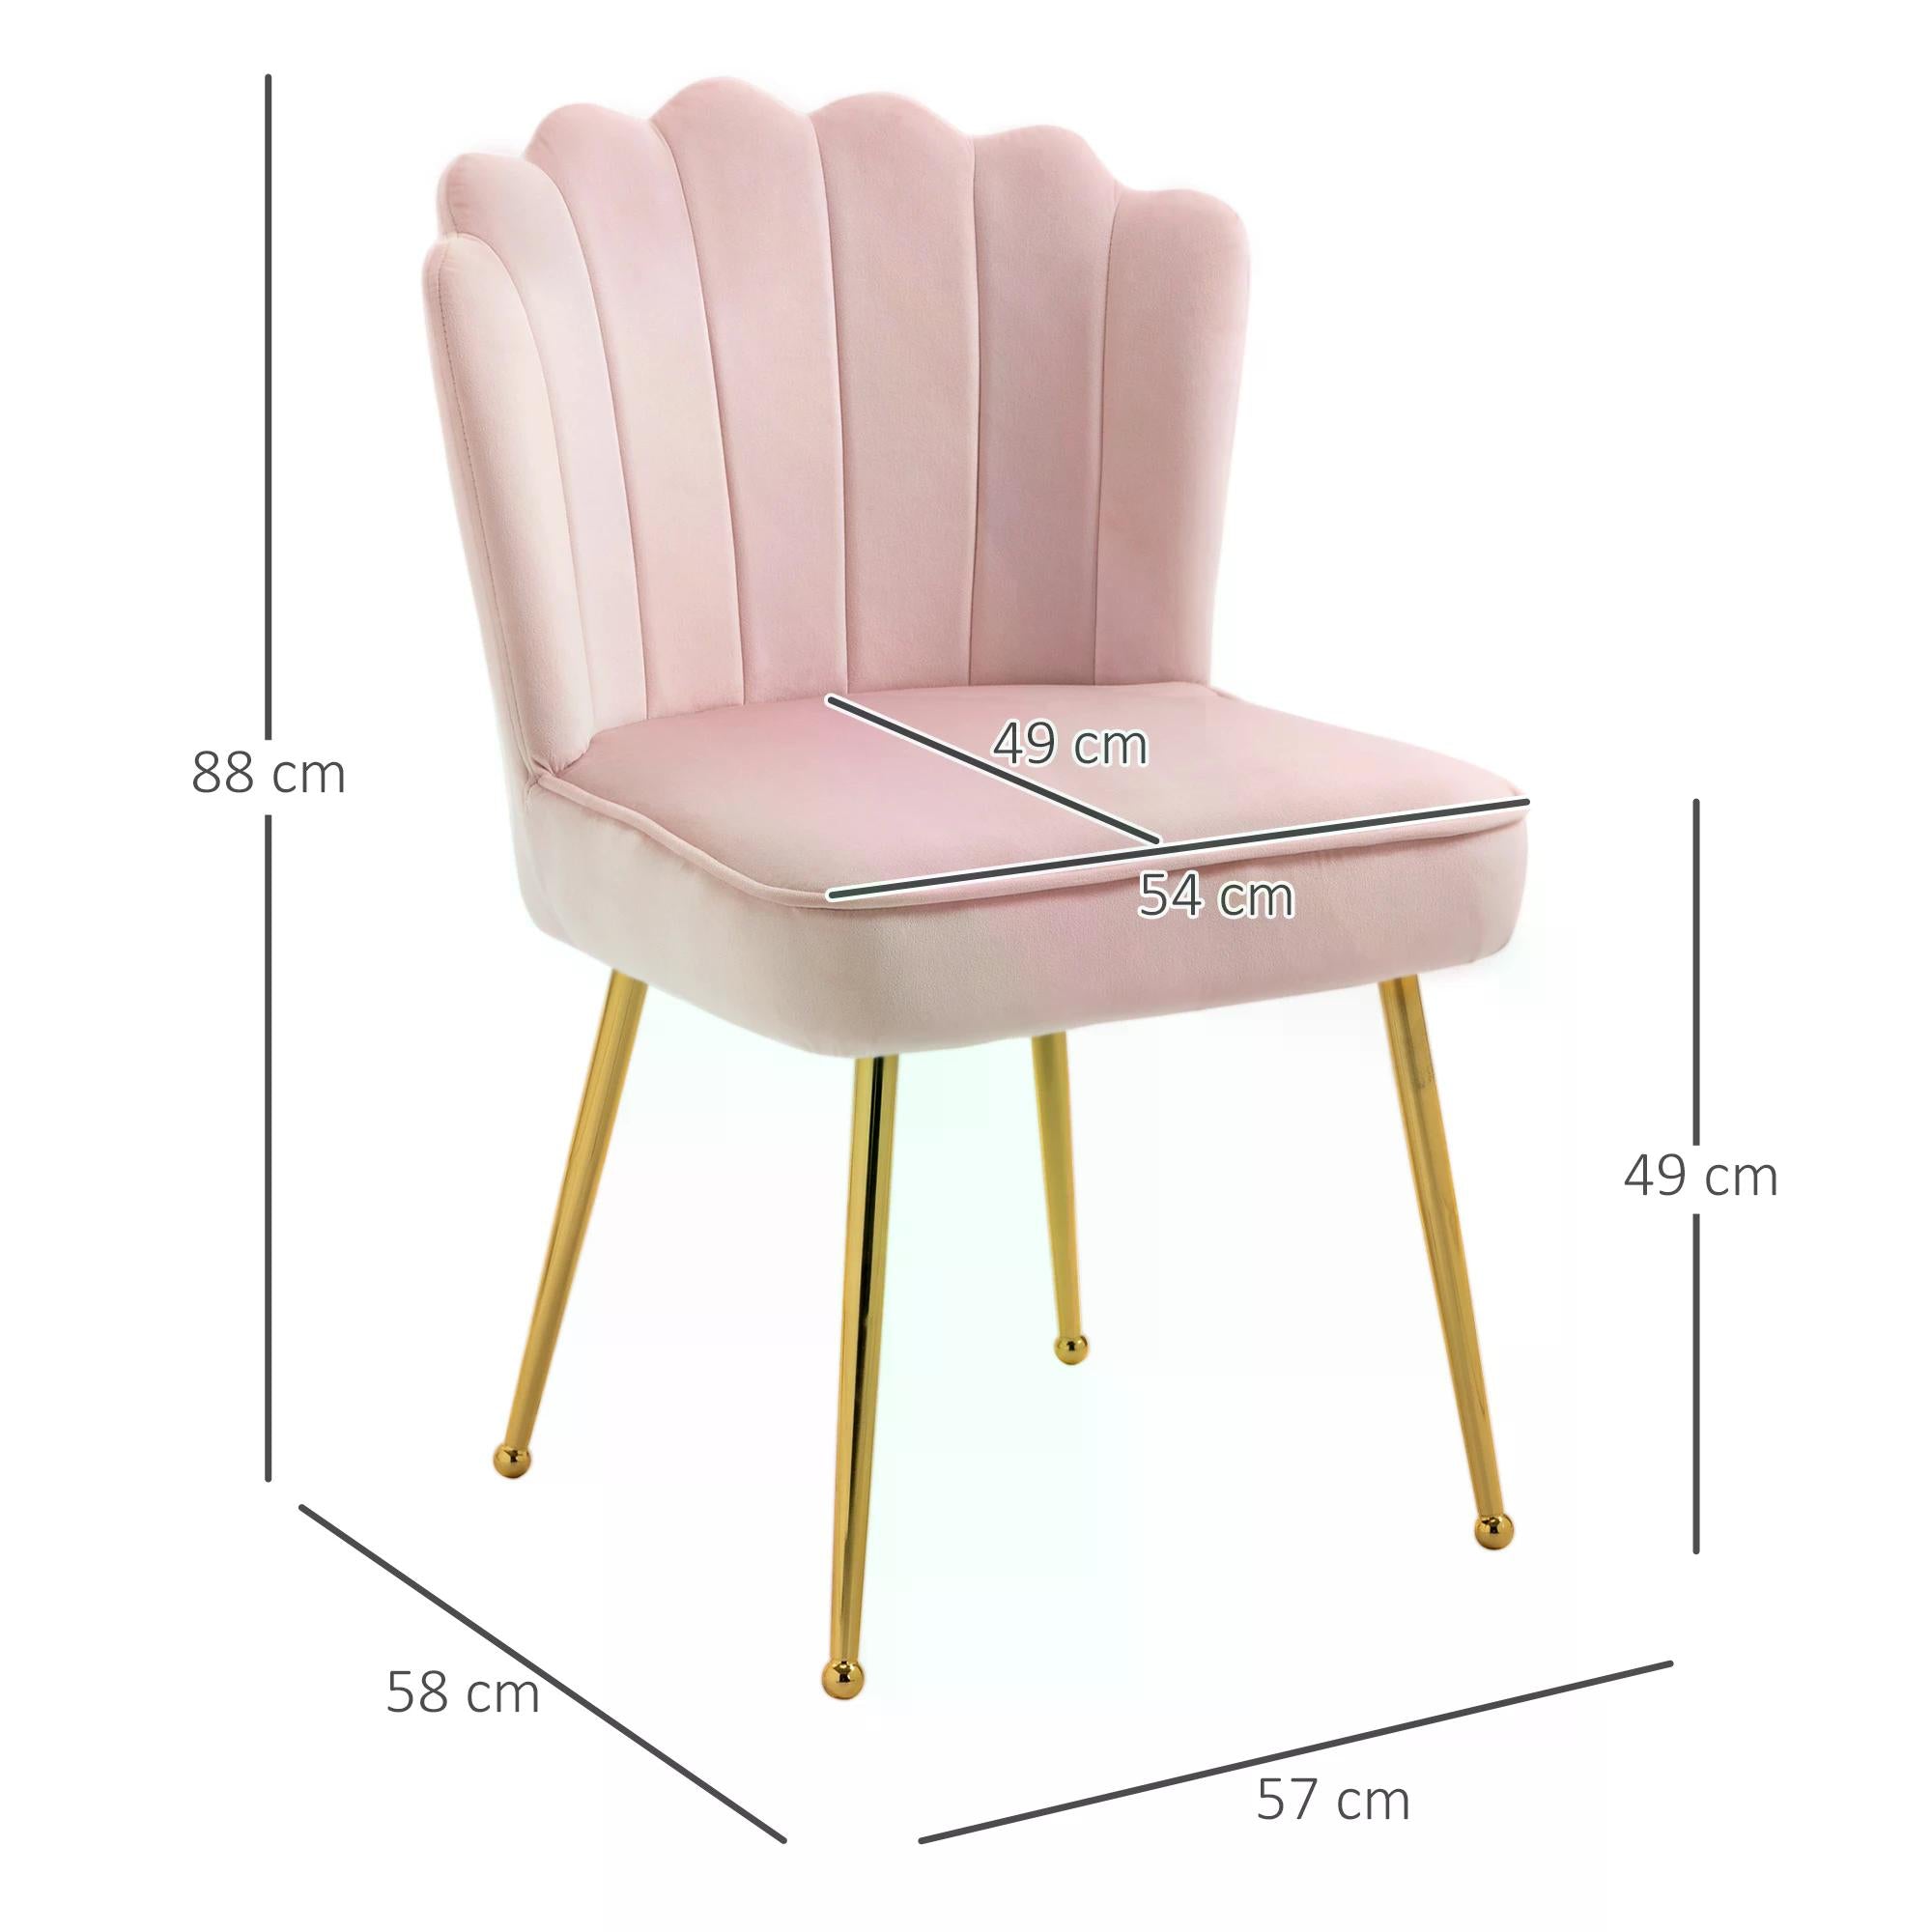 Velvet-Feel Shell Luxe Accent Chair, Glam Vanity Chair Makeup Seat, Home Bedroom Lounge with Metal Legs Comfort Padding, Pink-2